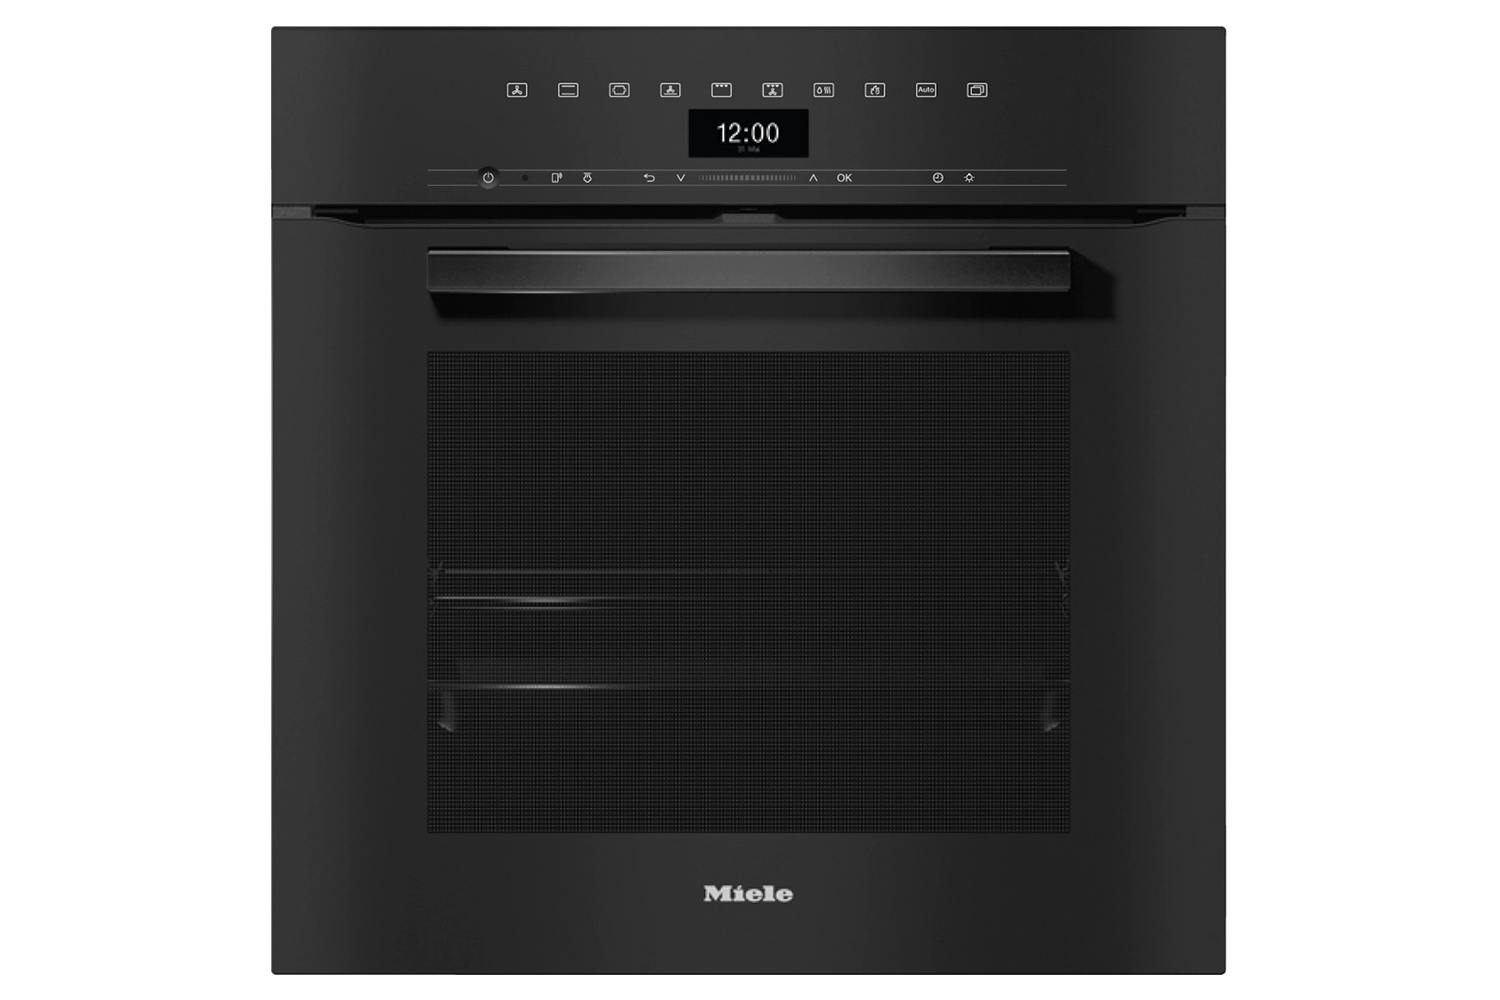 Miele Built-in Electric Single Oven | H7464BPBLACK